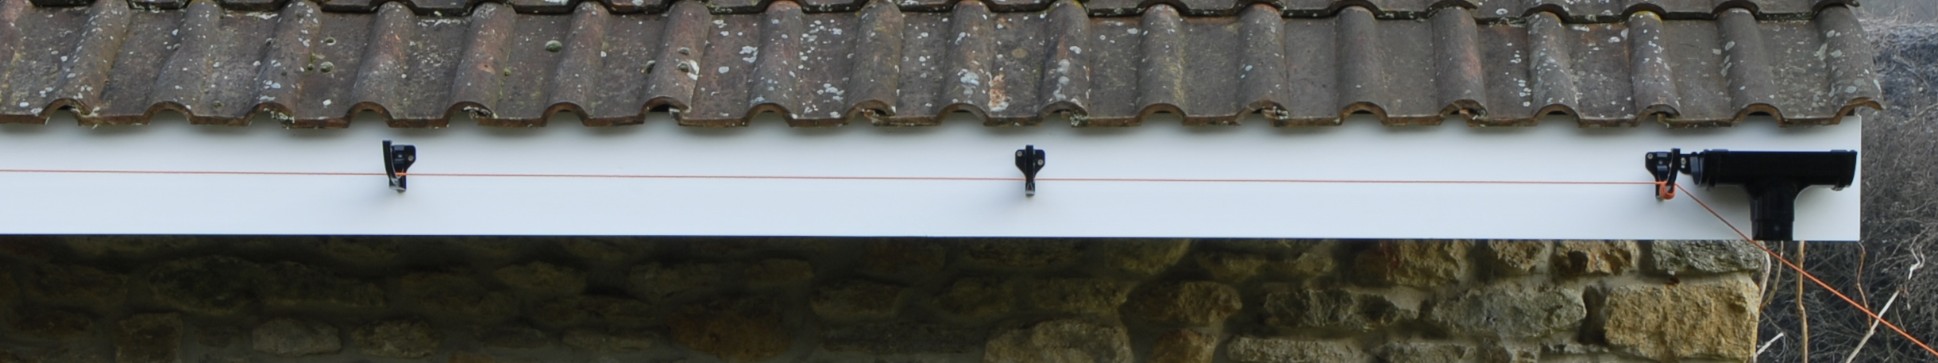 Gutter clips in place